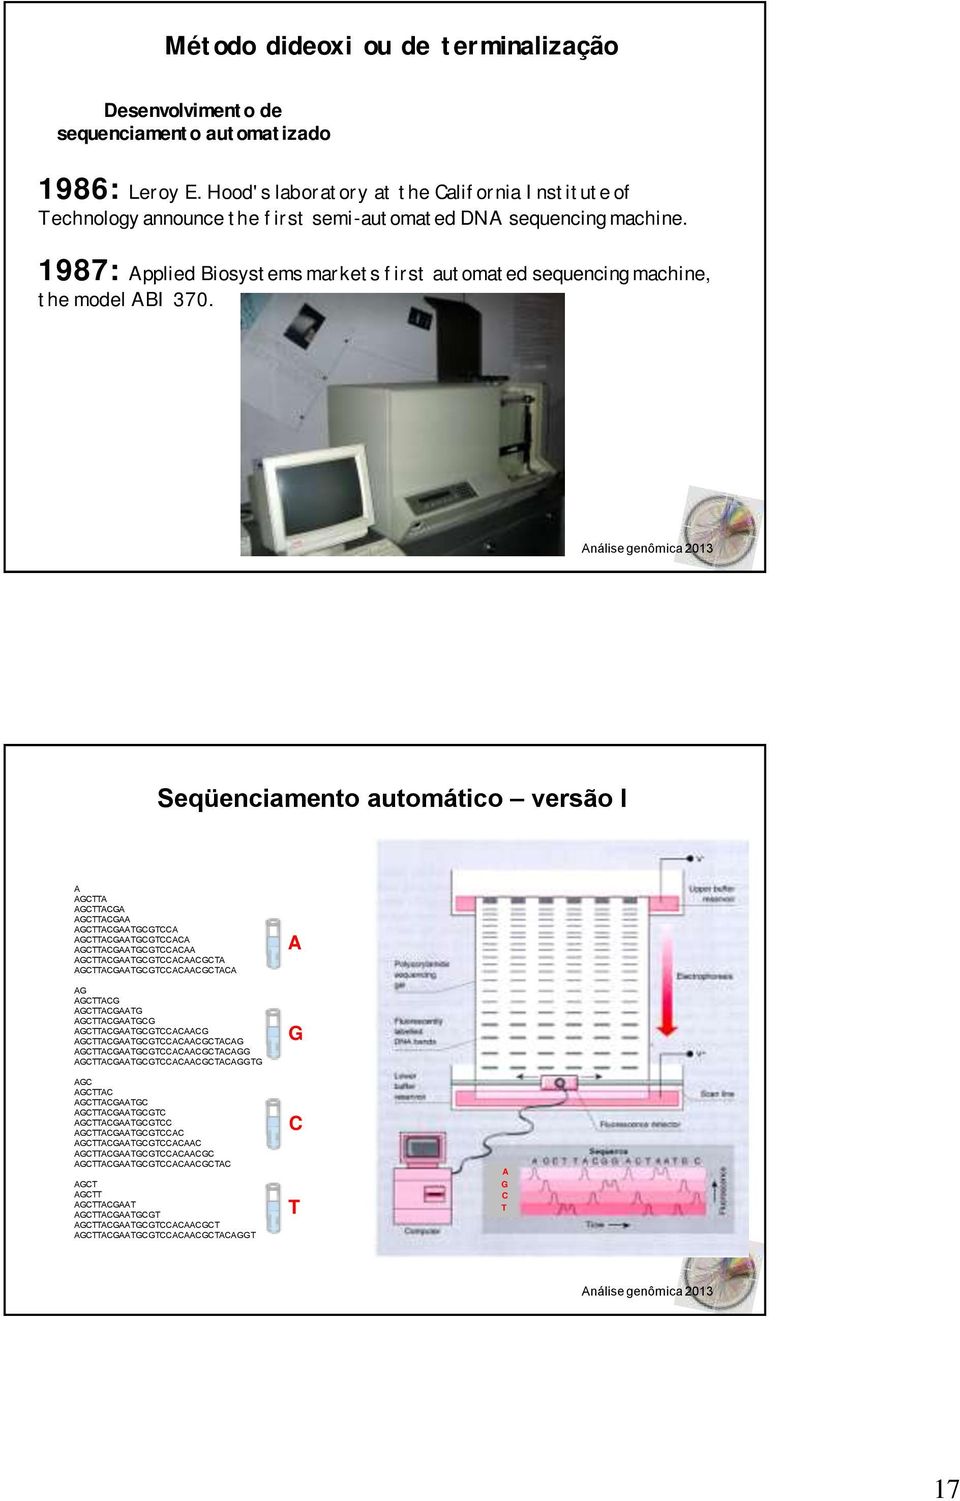 1987: Applied Biosystems markets first automated sequencing machine, the model ABI 370.